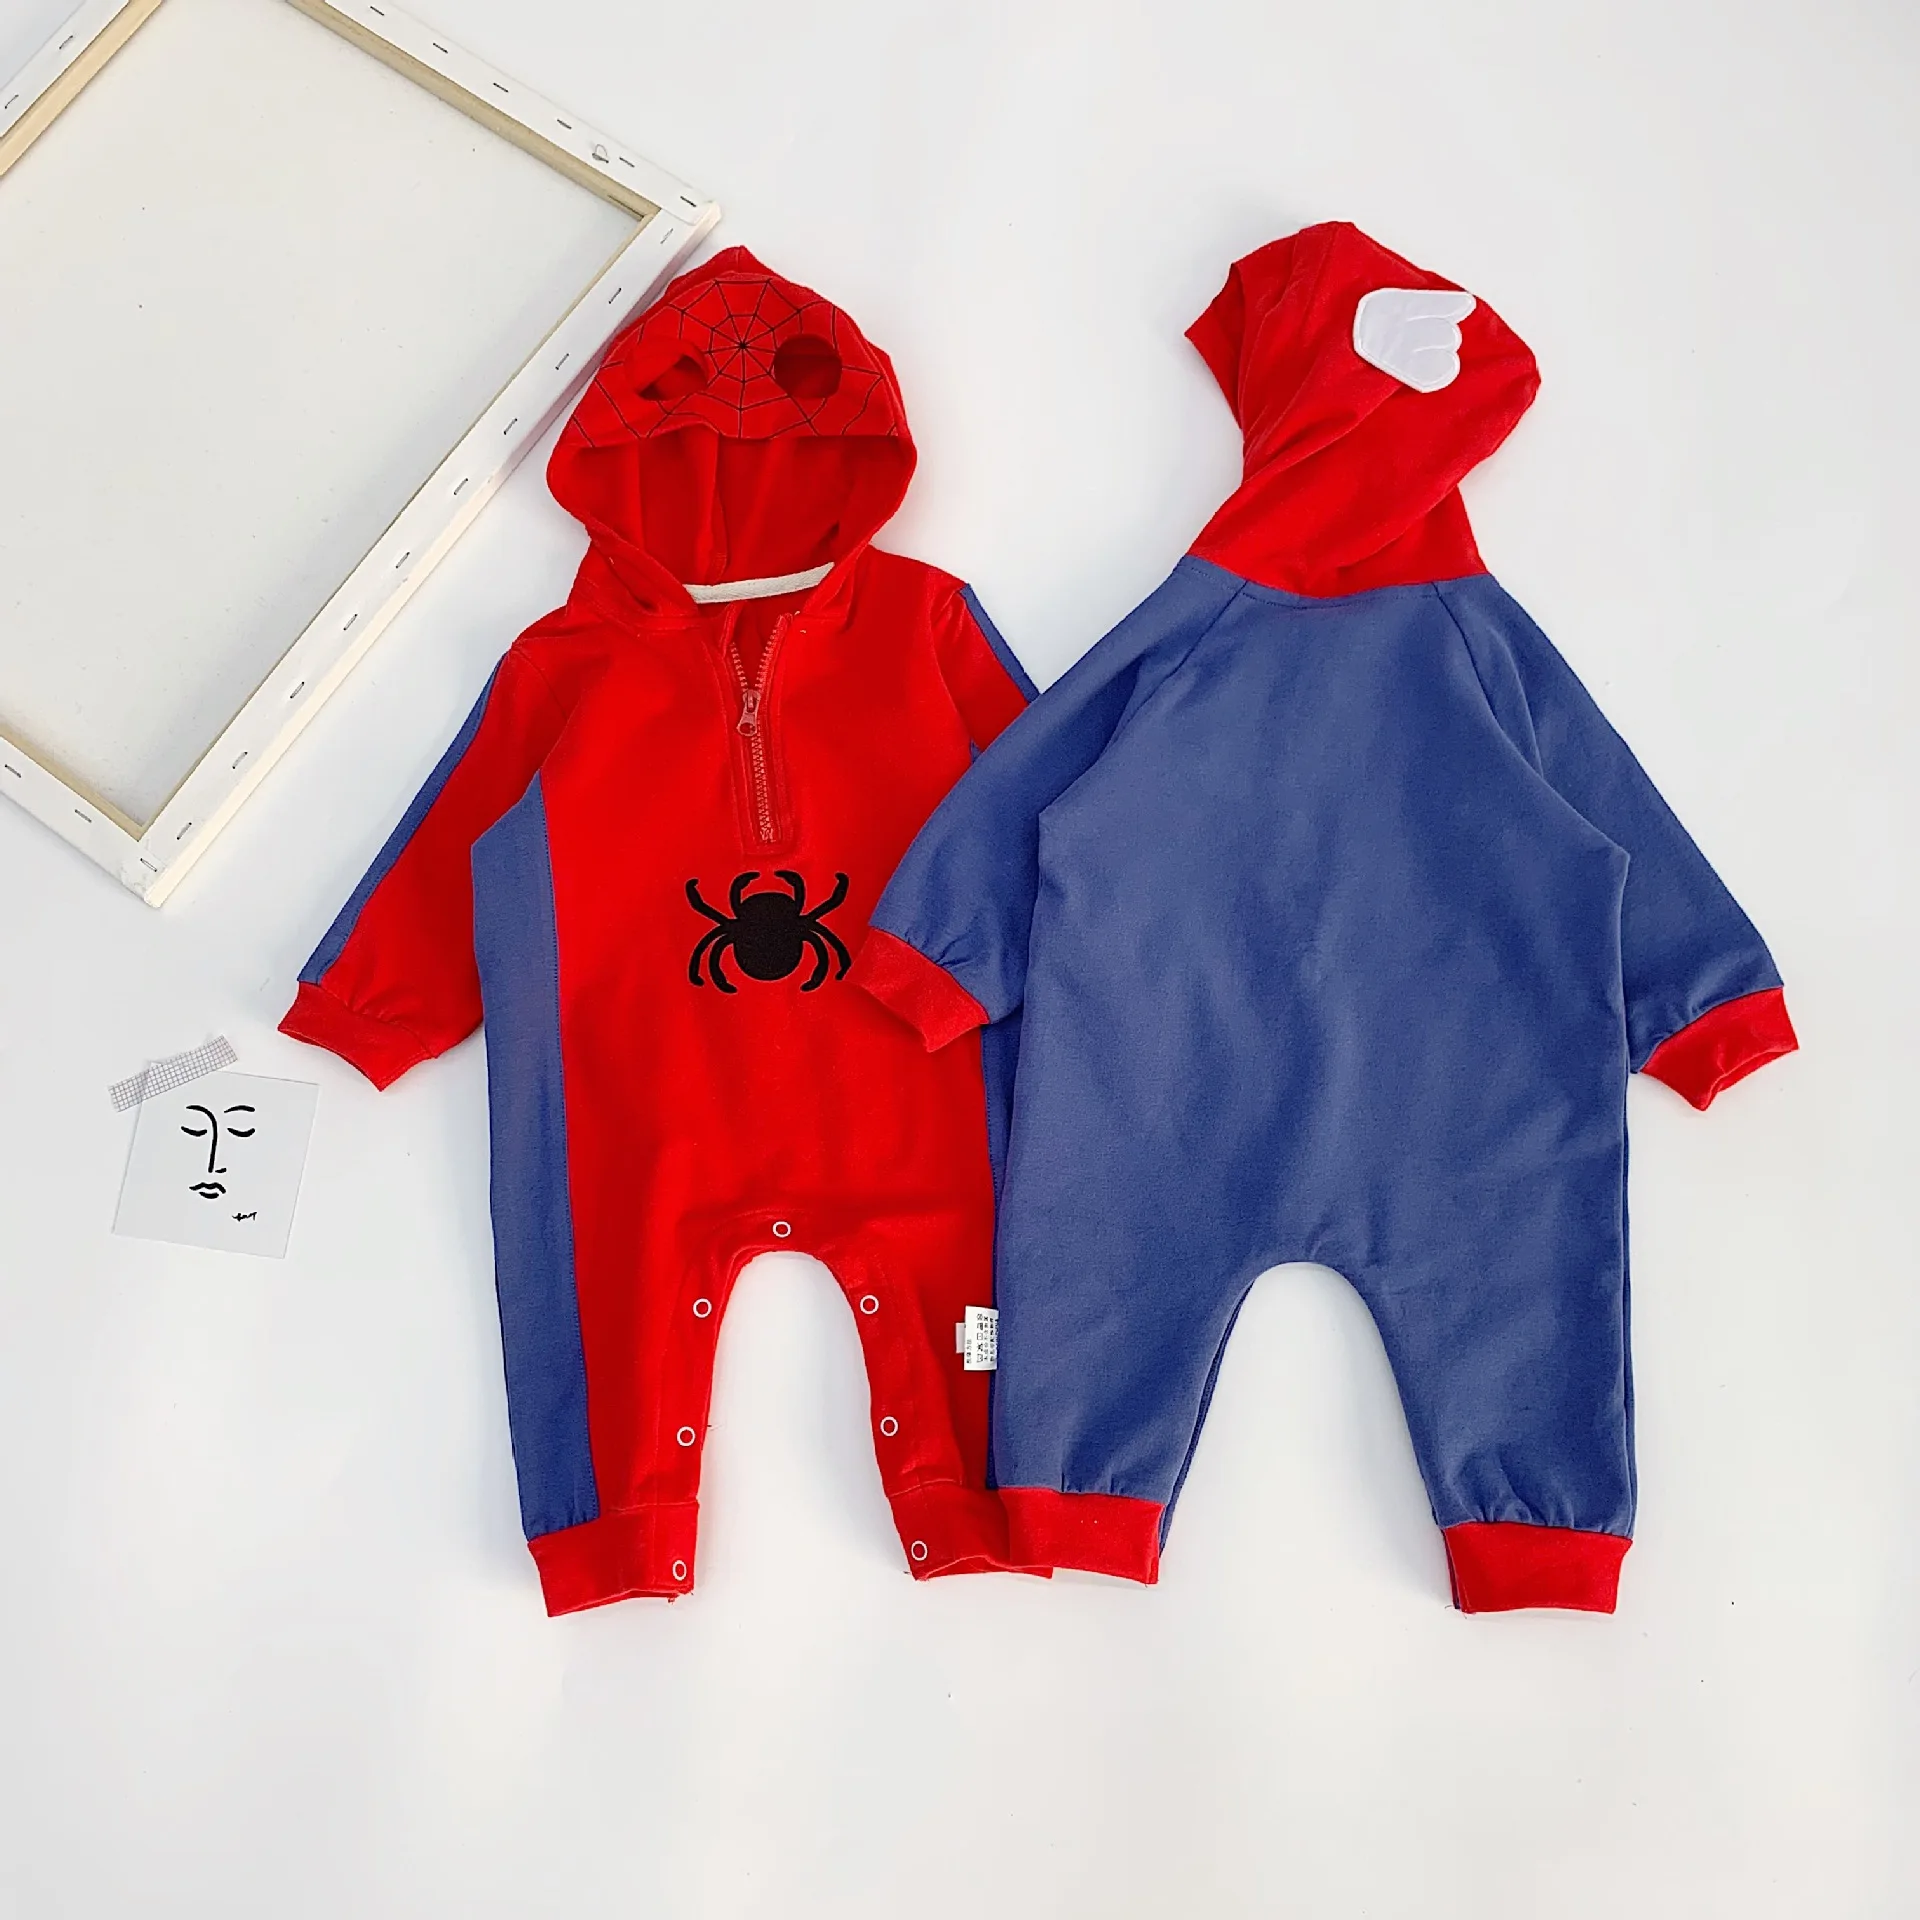 

Fancy Ball Hooded Kids Cosplay Costume Baby Boy Romper Superhero Movie Bodysuit Jumpsuit Children Party Clothes for Halloween, Red/blue